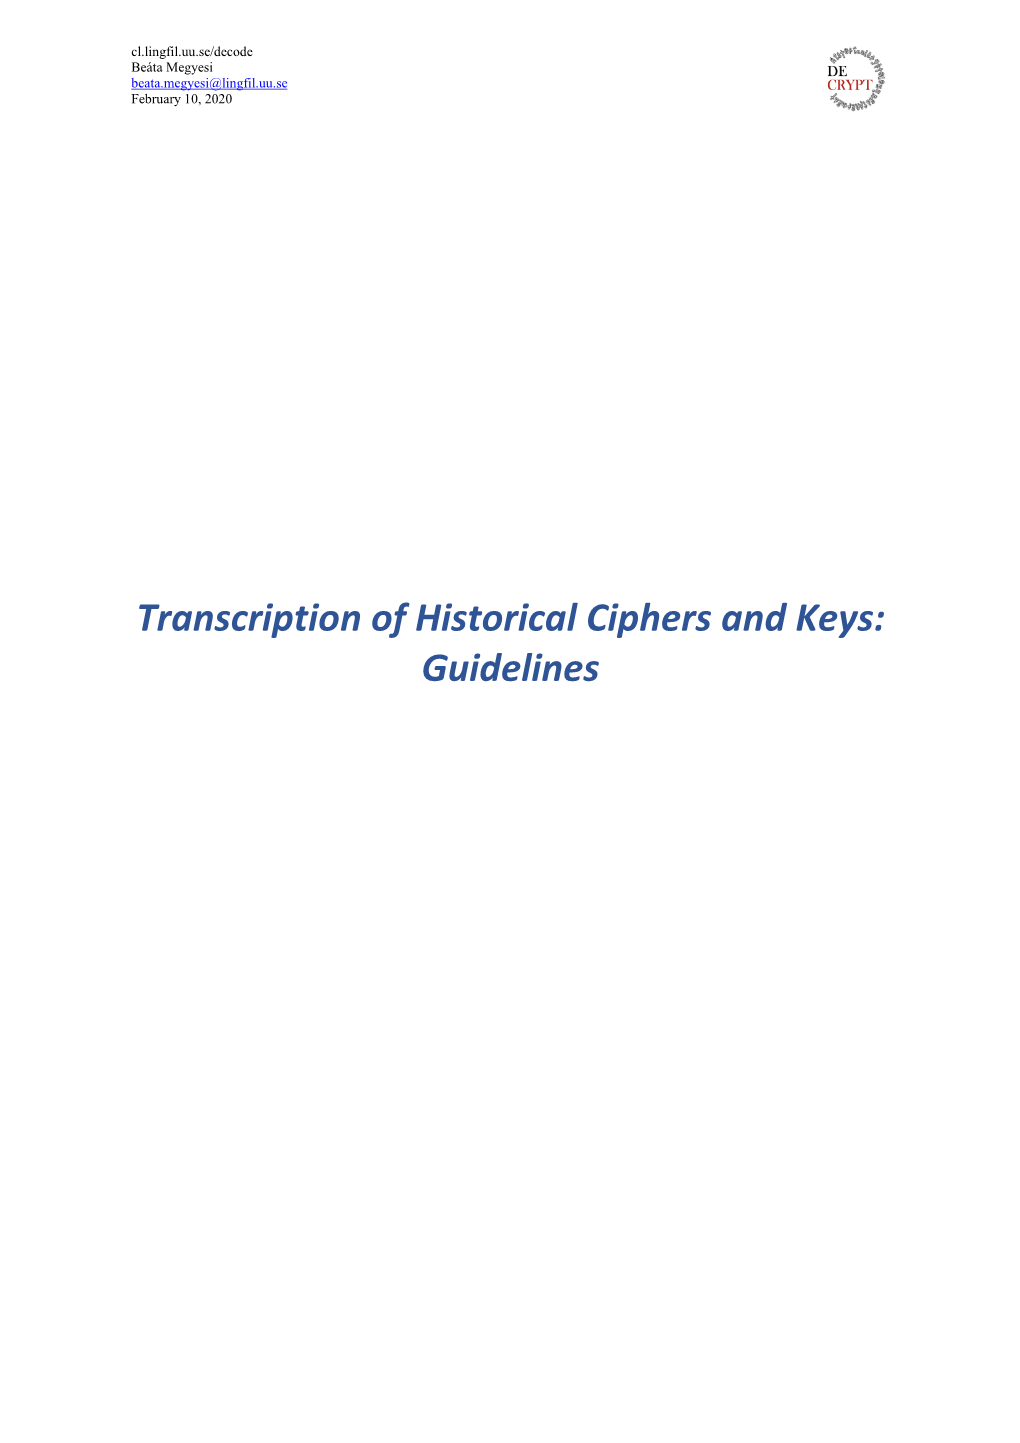 Transcription of Historical Ciphers and Keys: Guidelines